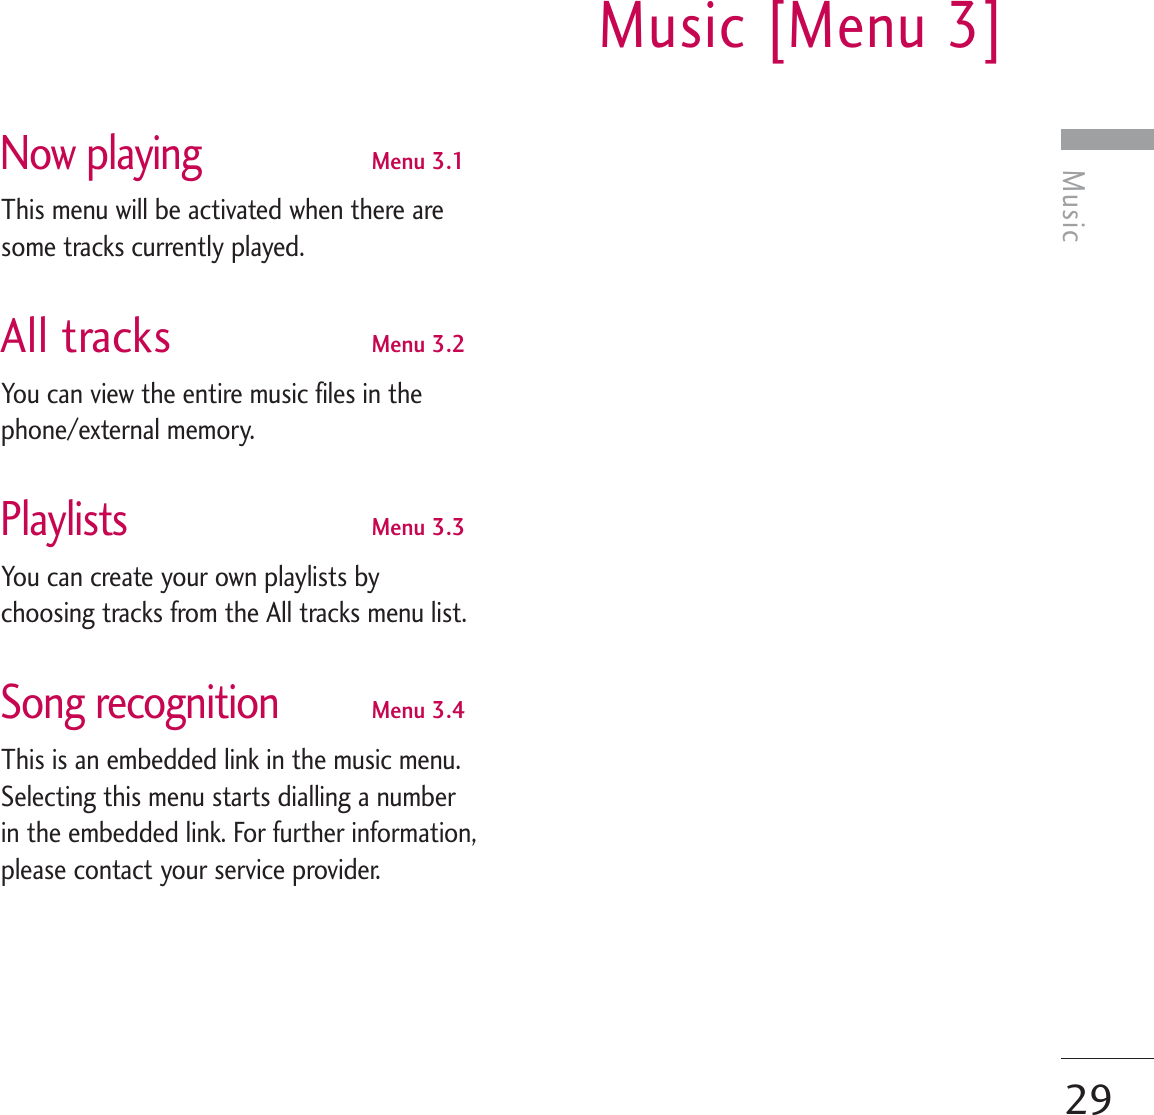 MusicMusic [Menu 3]29Now playingMenu 3.1This menu will be activated when there aresome tracks currently played.All tracks Menu 3.2You can view the entire music files in thephone/external memory.PlaylistsMenu 3.3You can create your own playlists bychoosing tracks from the All tracks menu list.Song recognitionMenu 3.4This is an embedded link in the music menu.Selecting this menu starts dialling a numberin the embedded link. For further information,please contact your service provider.